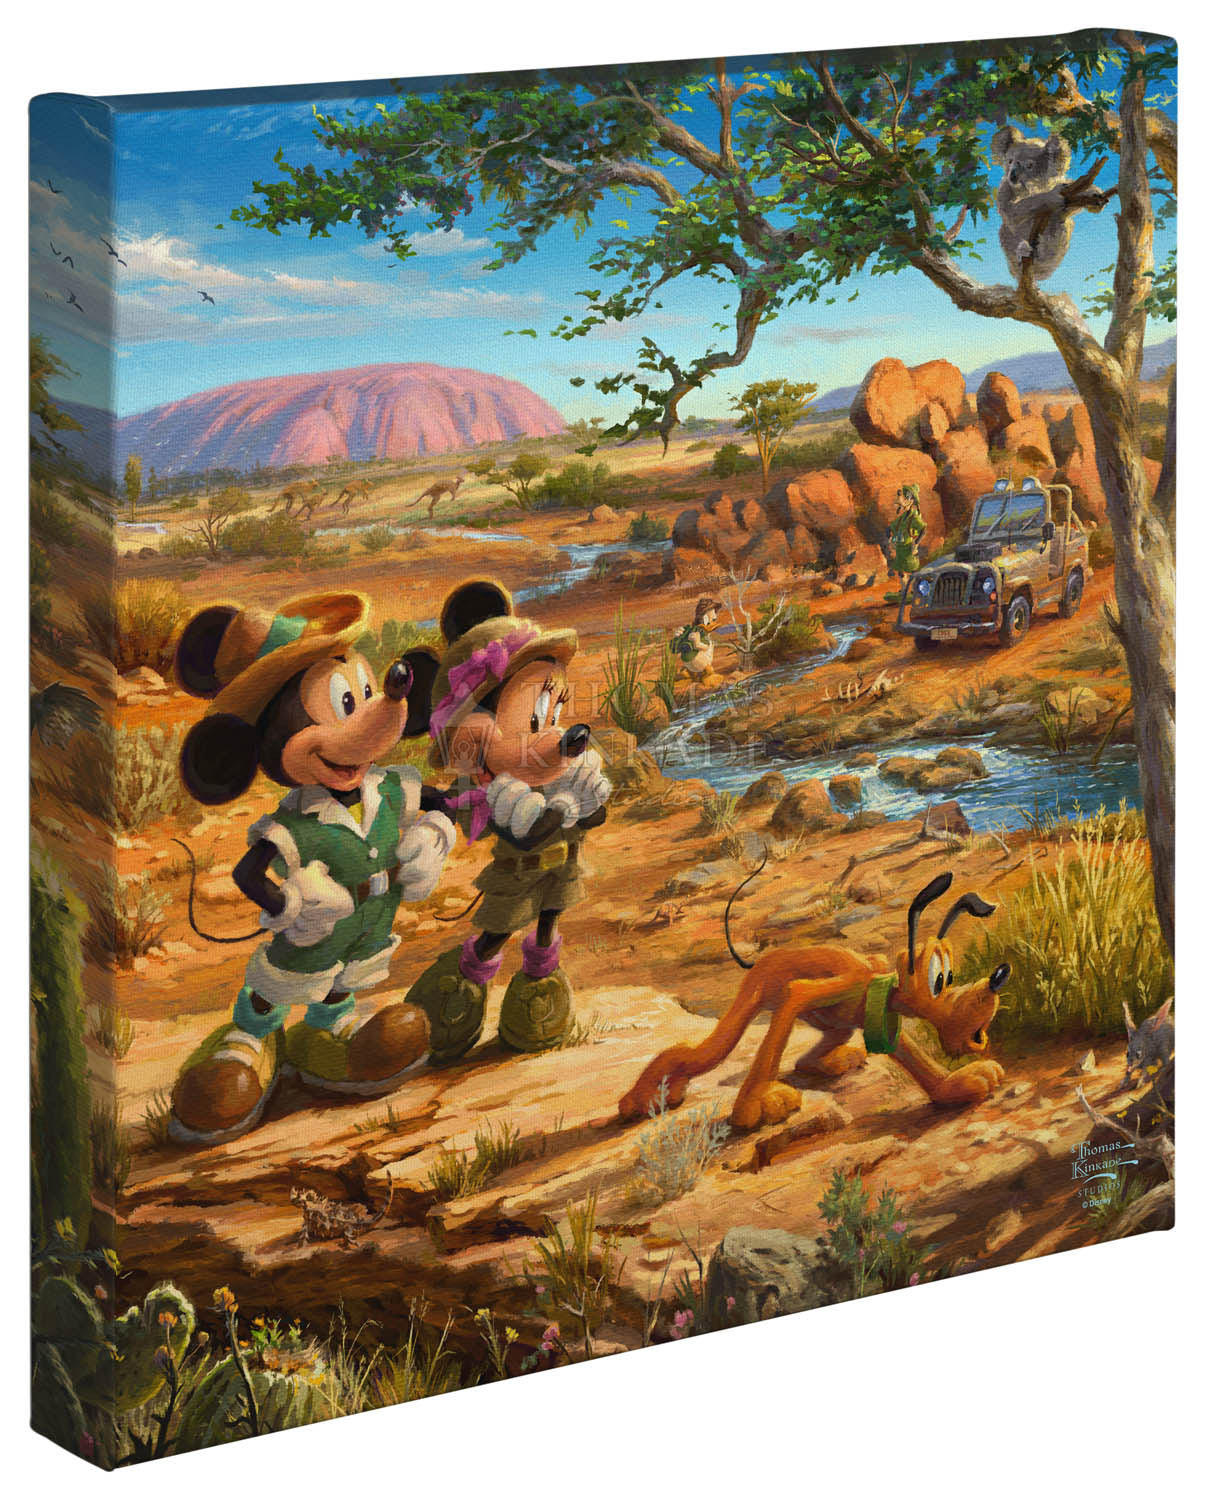 Thomas Kinkade Studios "Mickey and Minnie in the Outback" Limited and Open Canvas Giclee